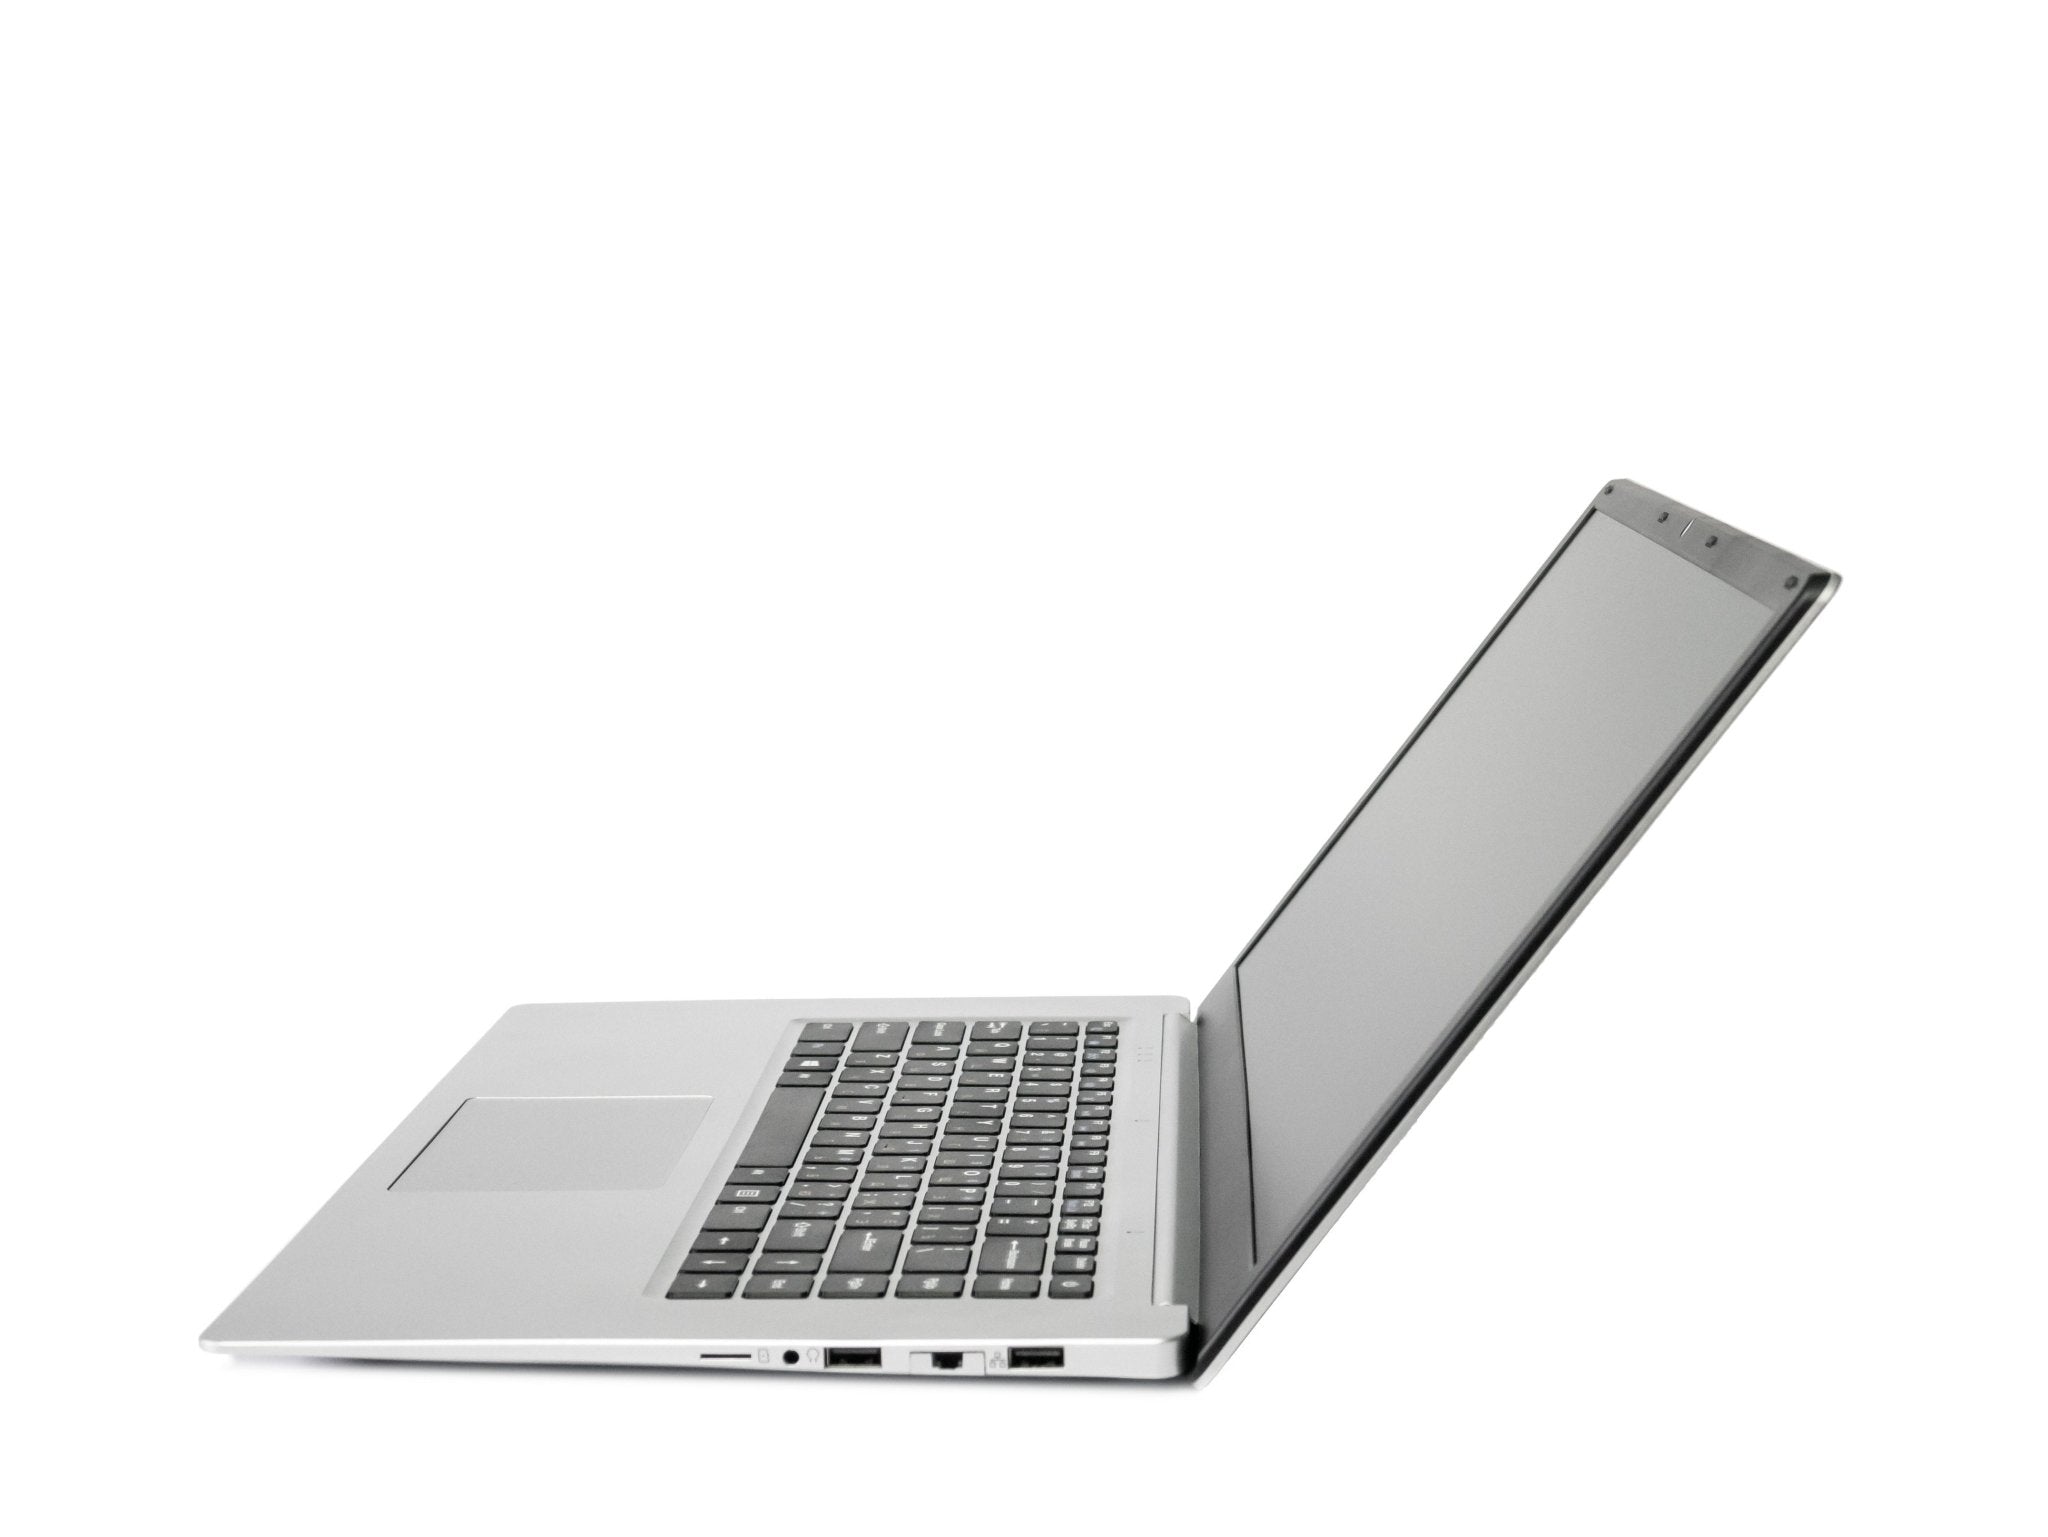 Promotion cheap 15.6 inch 4GB+64GB ultrabook Wind ows 10 Intel cpu X5-Z8350 Quad Core Up to 1.92Ghz laptops GreatEagleInc